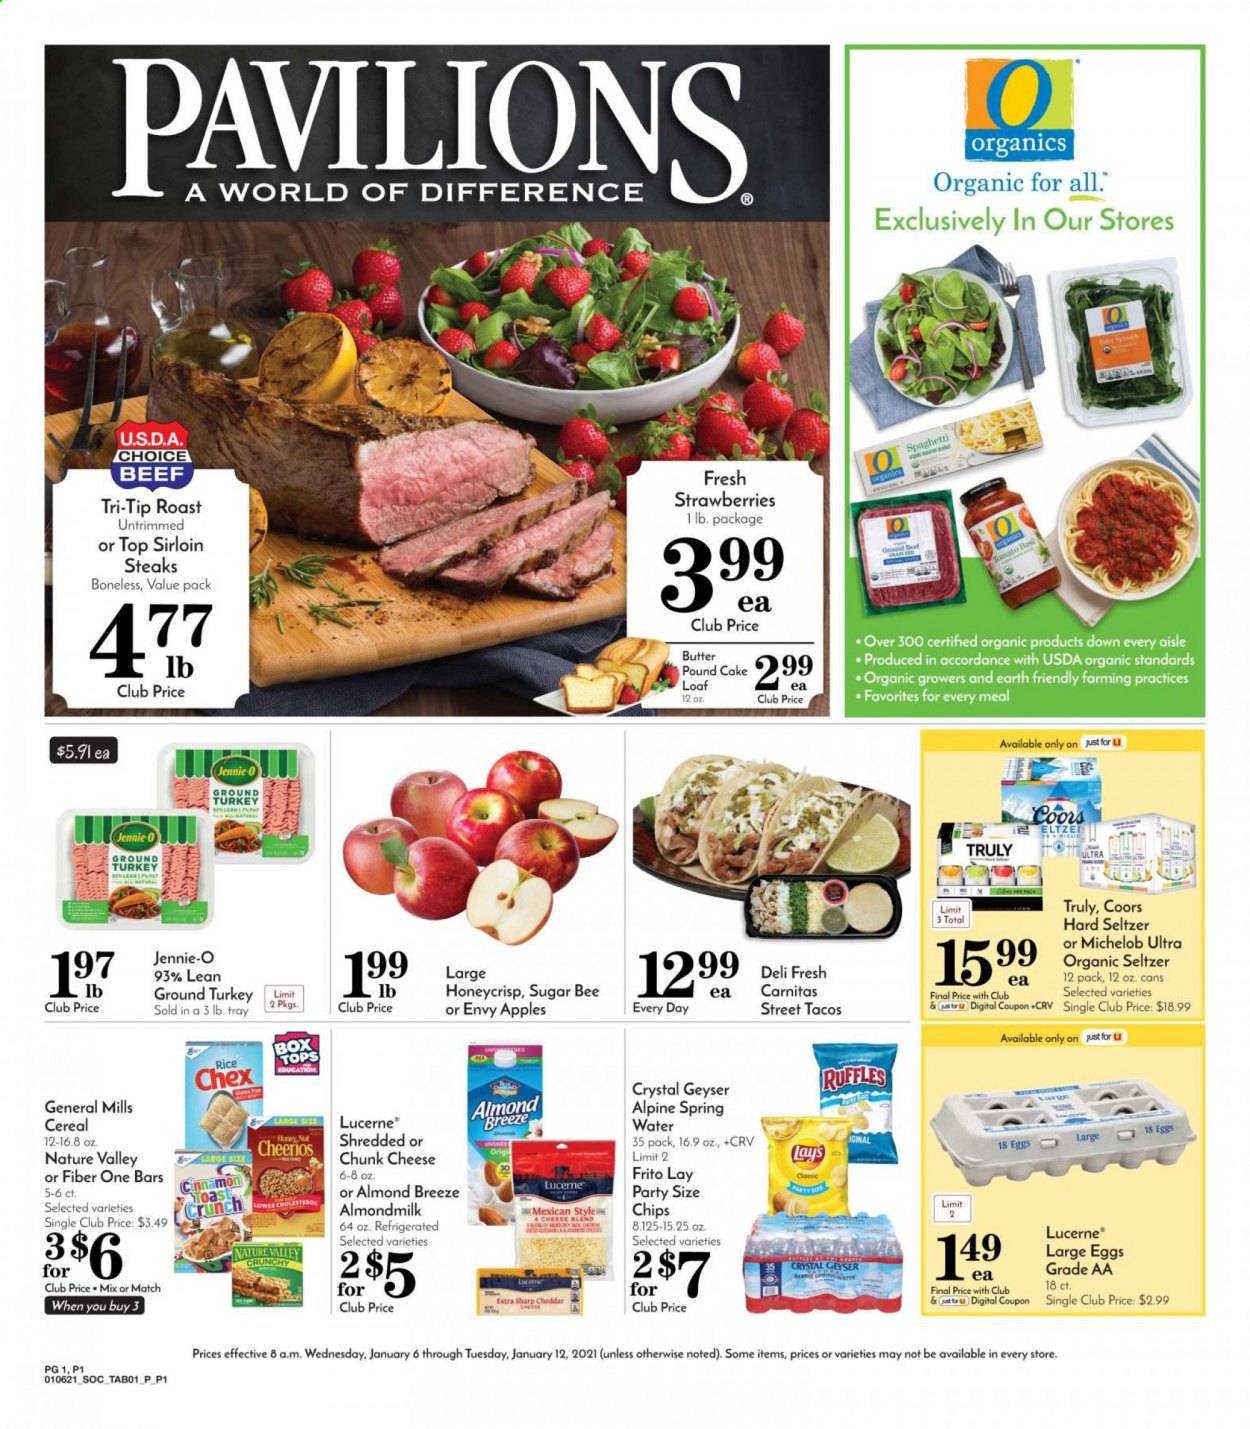 thumbnail - Pavilions Flyer - 01/06/2021 - 01/12/2021 - Sales products - Coors, Michelob, toast bread, tacos, cake, pound cake, apples, cheese, chunk cheese, Almond Breeze, almond milk, large eggs, butter, strawberries, chips, Lay’s, Ruffles, sugar, cereals, Cheerios, Nature Valley, Fiber One, rice, spaghetti, esponja, cinnamon, seltzer water, spring water, Hard Seltzer, TRULY, beer, ground turkey, steak, sirloin steak. Page 1.